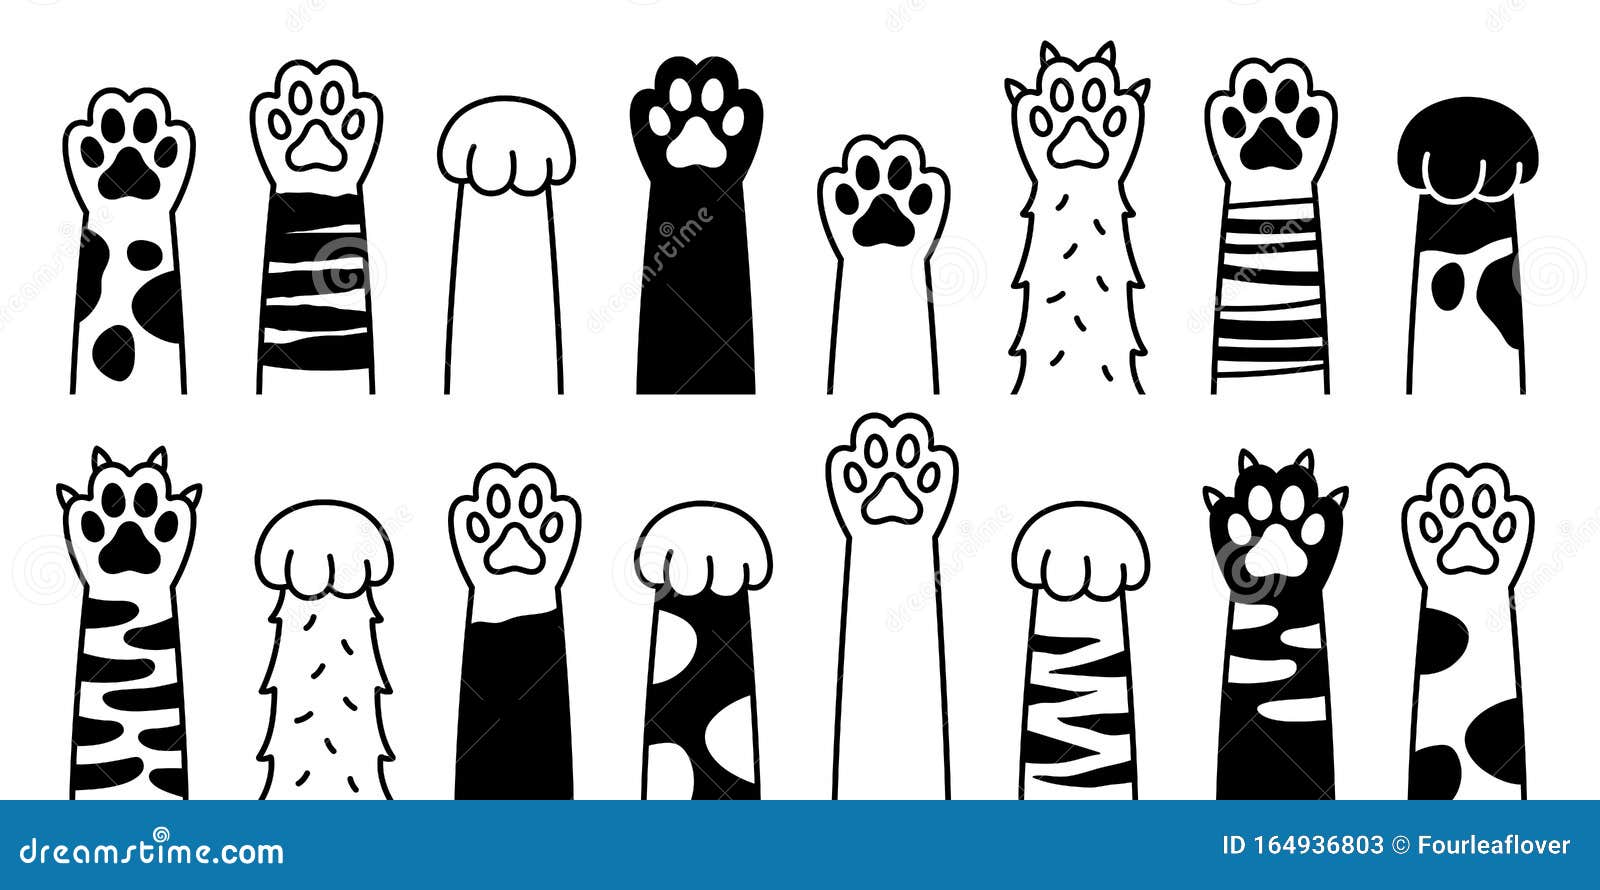 Paw Vector Paw Cat Breed Vector Doodle Character Stock Vector - Illustration of icon: 164936803